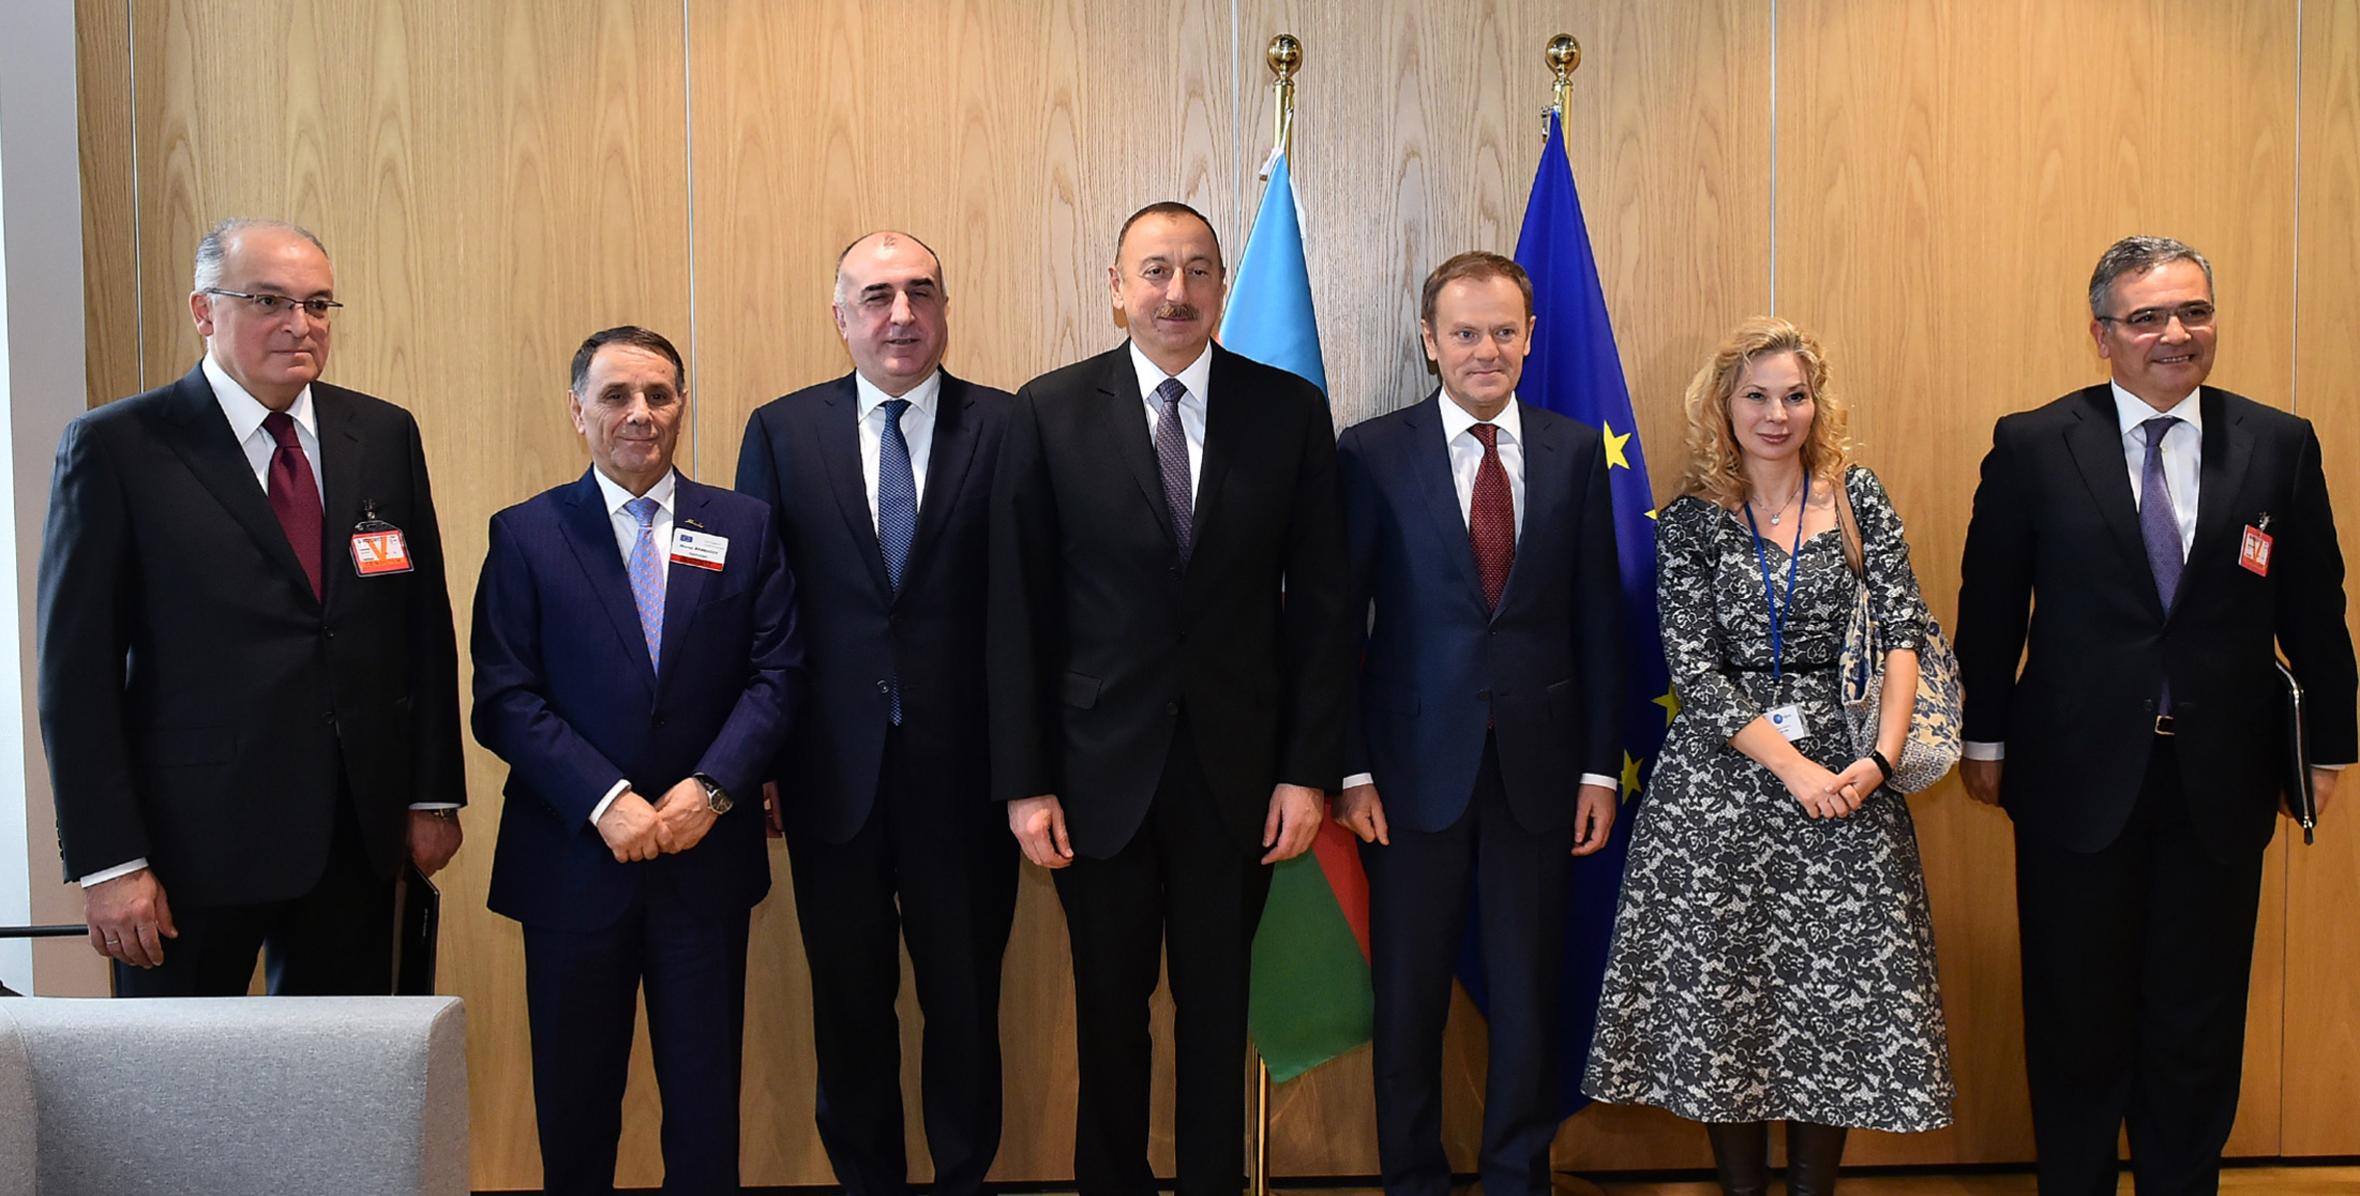 Ilham Aliyev met with President of European Council